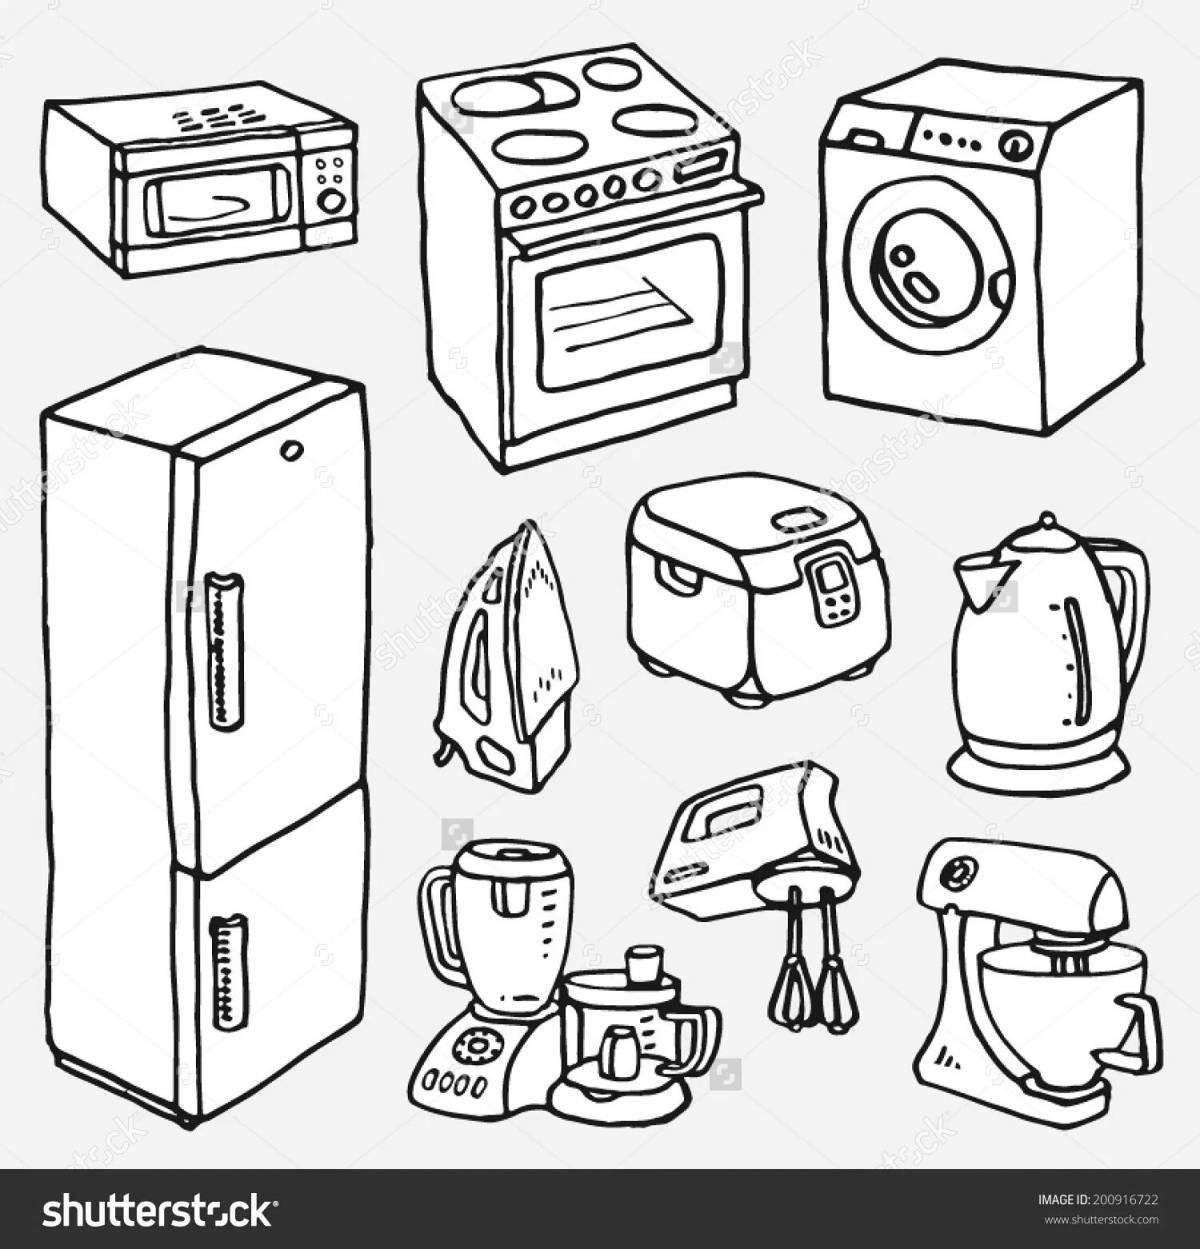 Bright coloring of household appliances